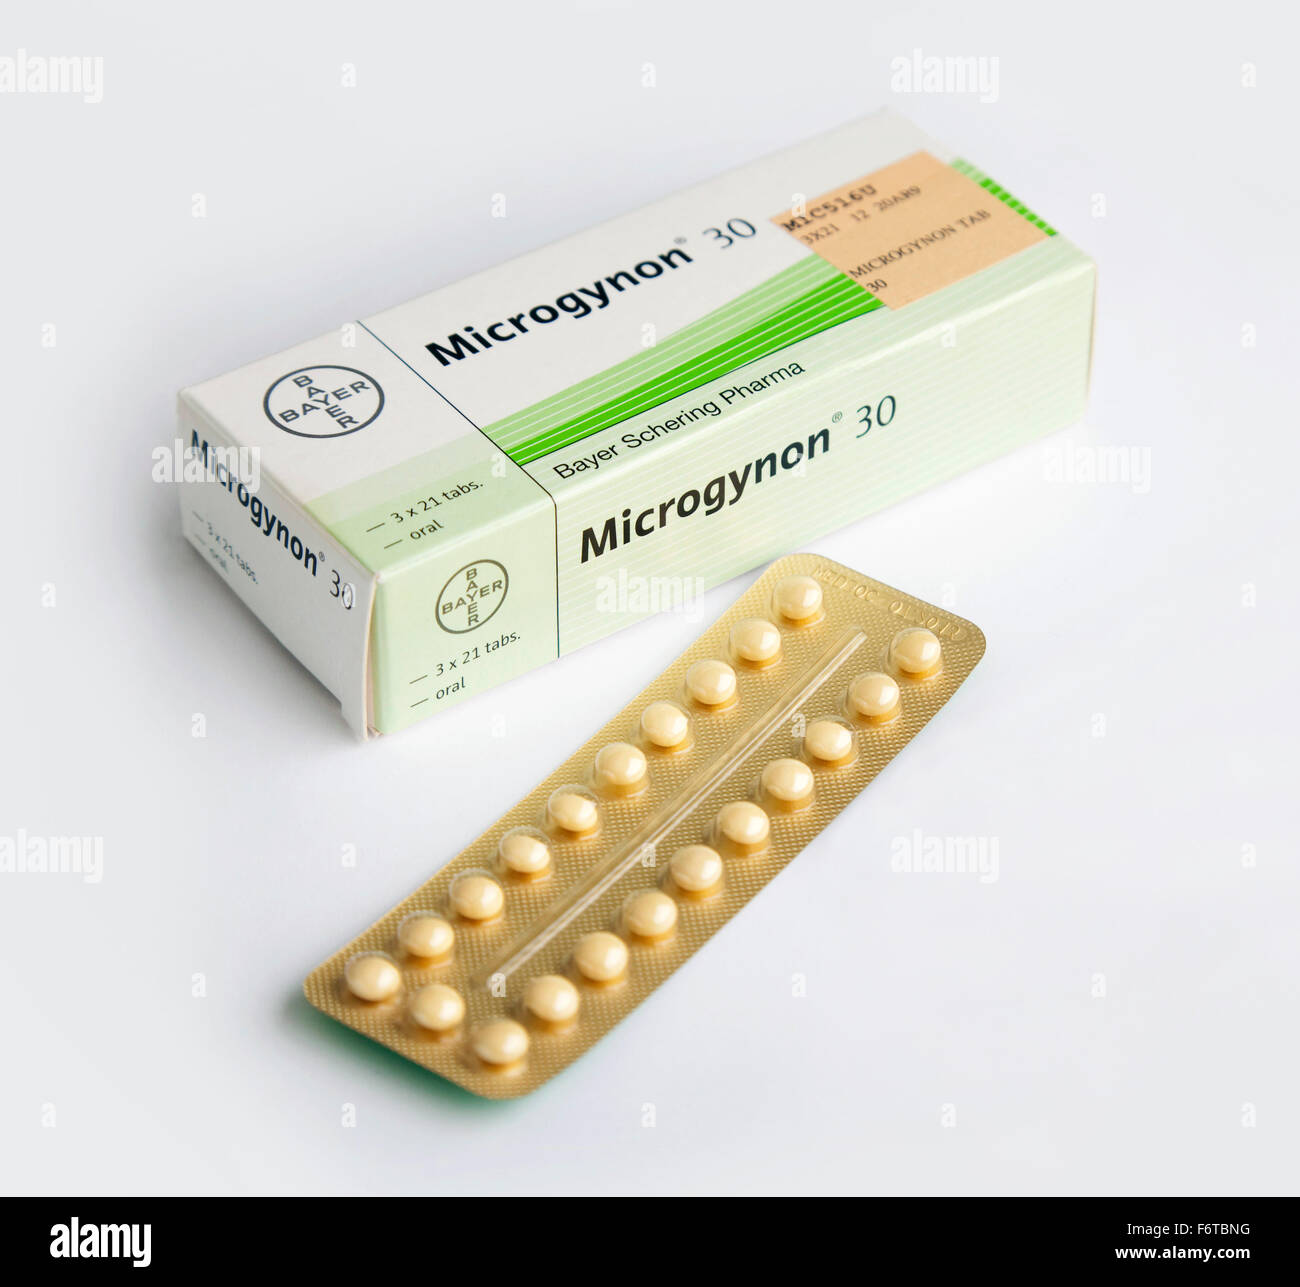 Microgynon 30 pilules contraceptives Banque D'Images